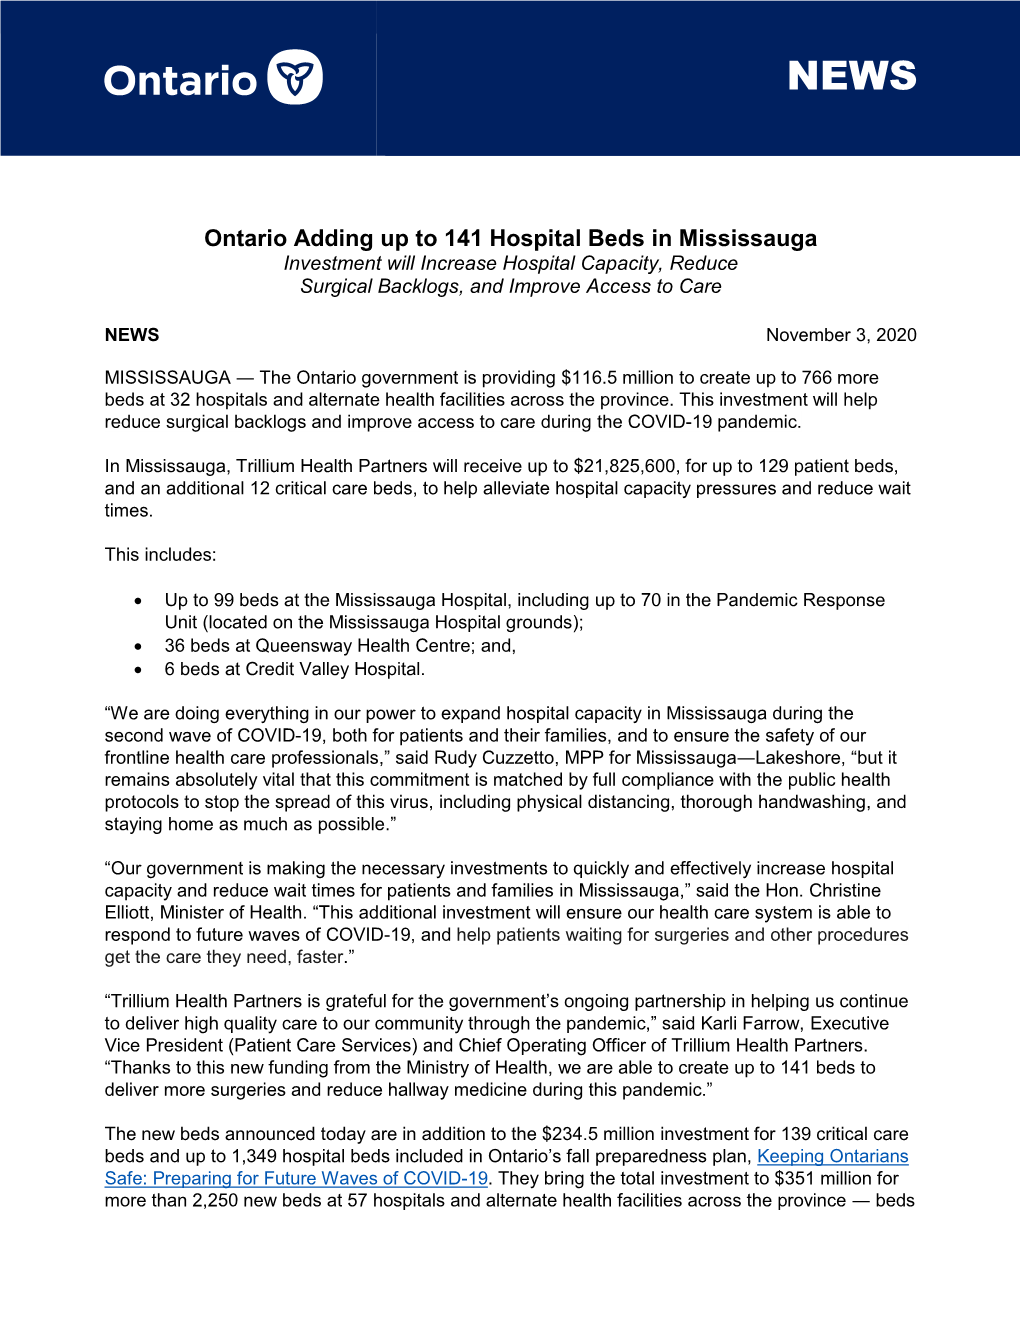 Ontario Adding up to 141 Hospital Beds in Mississauga Investment Will Increase Hospital Capacity, Reduce Surgical Backlogs, and Improve Access to Care